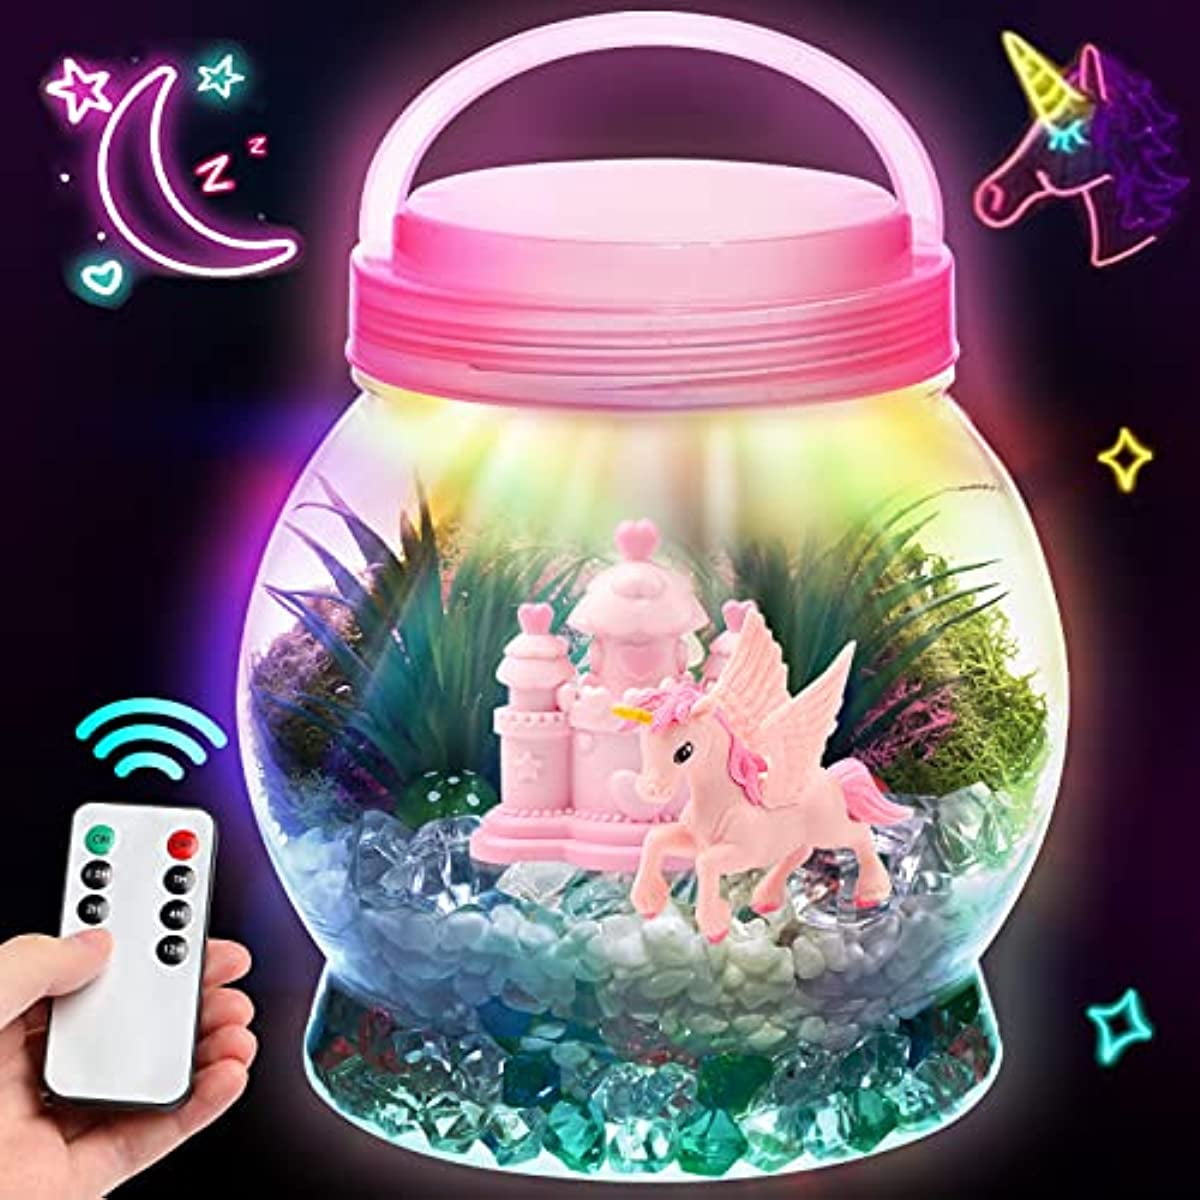 Unicorn Gifts for Girls - Unicorn Terrarium Kit for Kids - Birthday Gift  for Girls Ages 4 5 6 7 8-12 Year Old - DIY Unicorn Toys for Girls - Arts  and